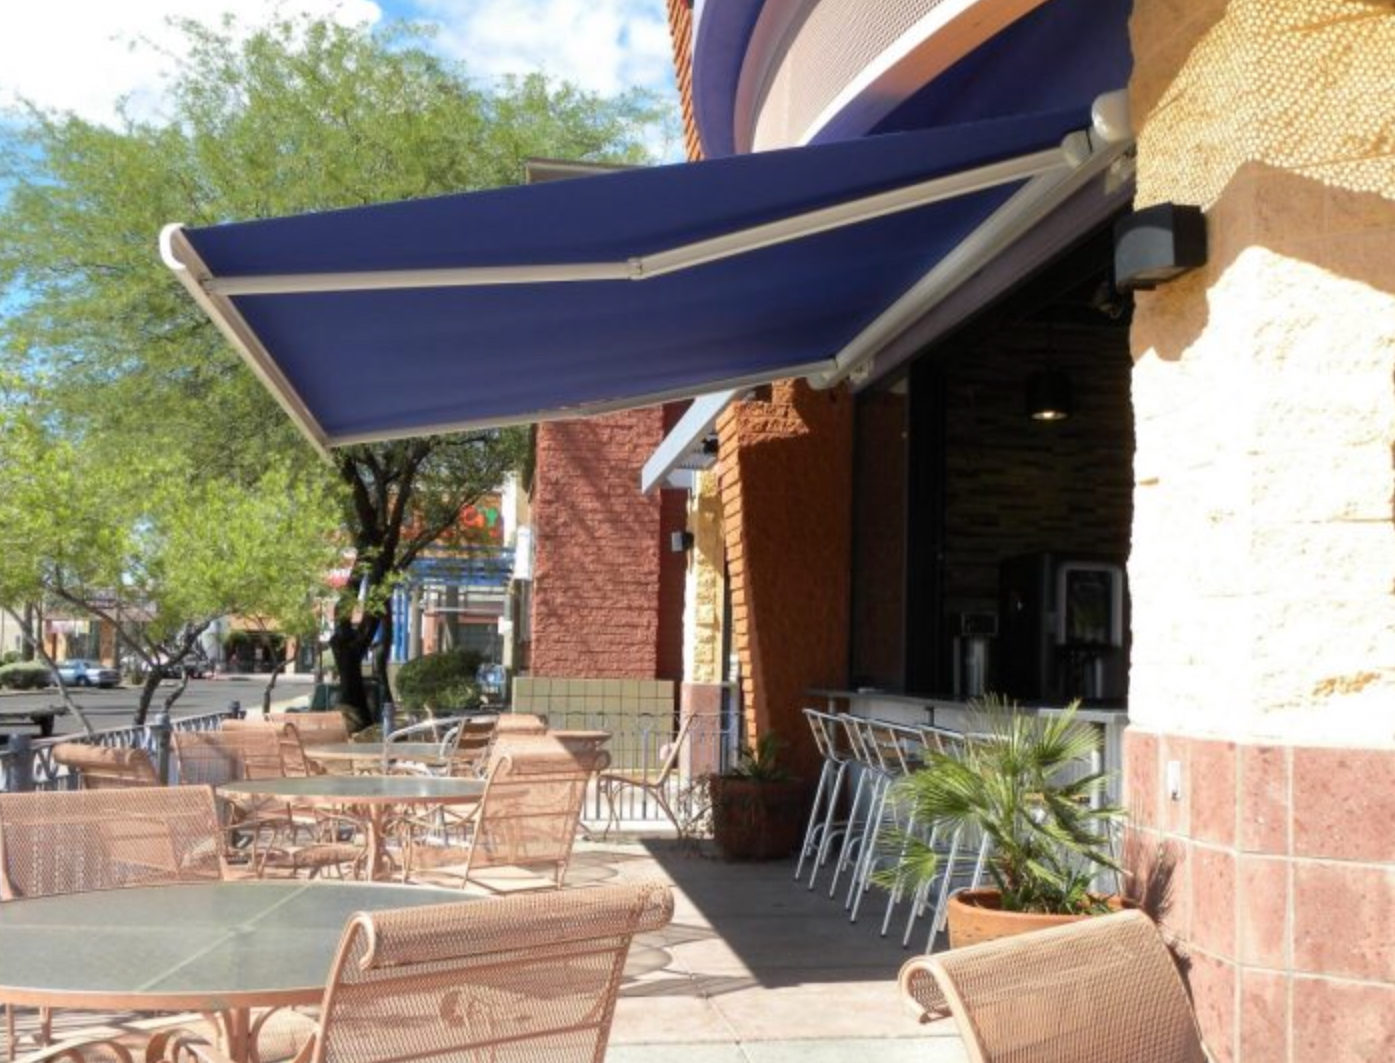 COMMERCIAL RETRACTABLE AWNING